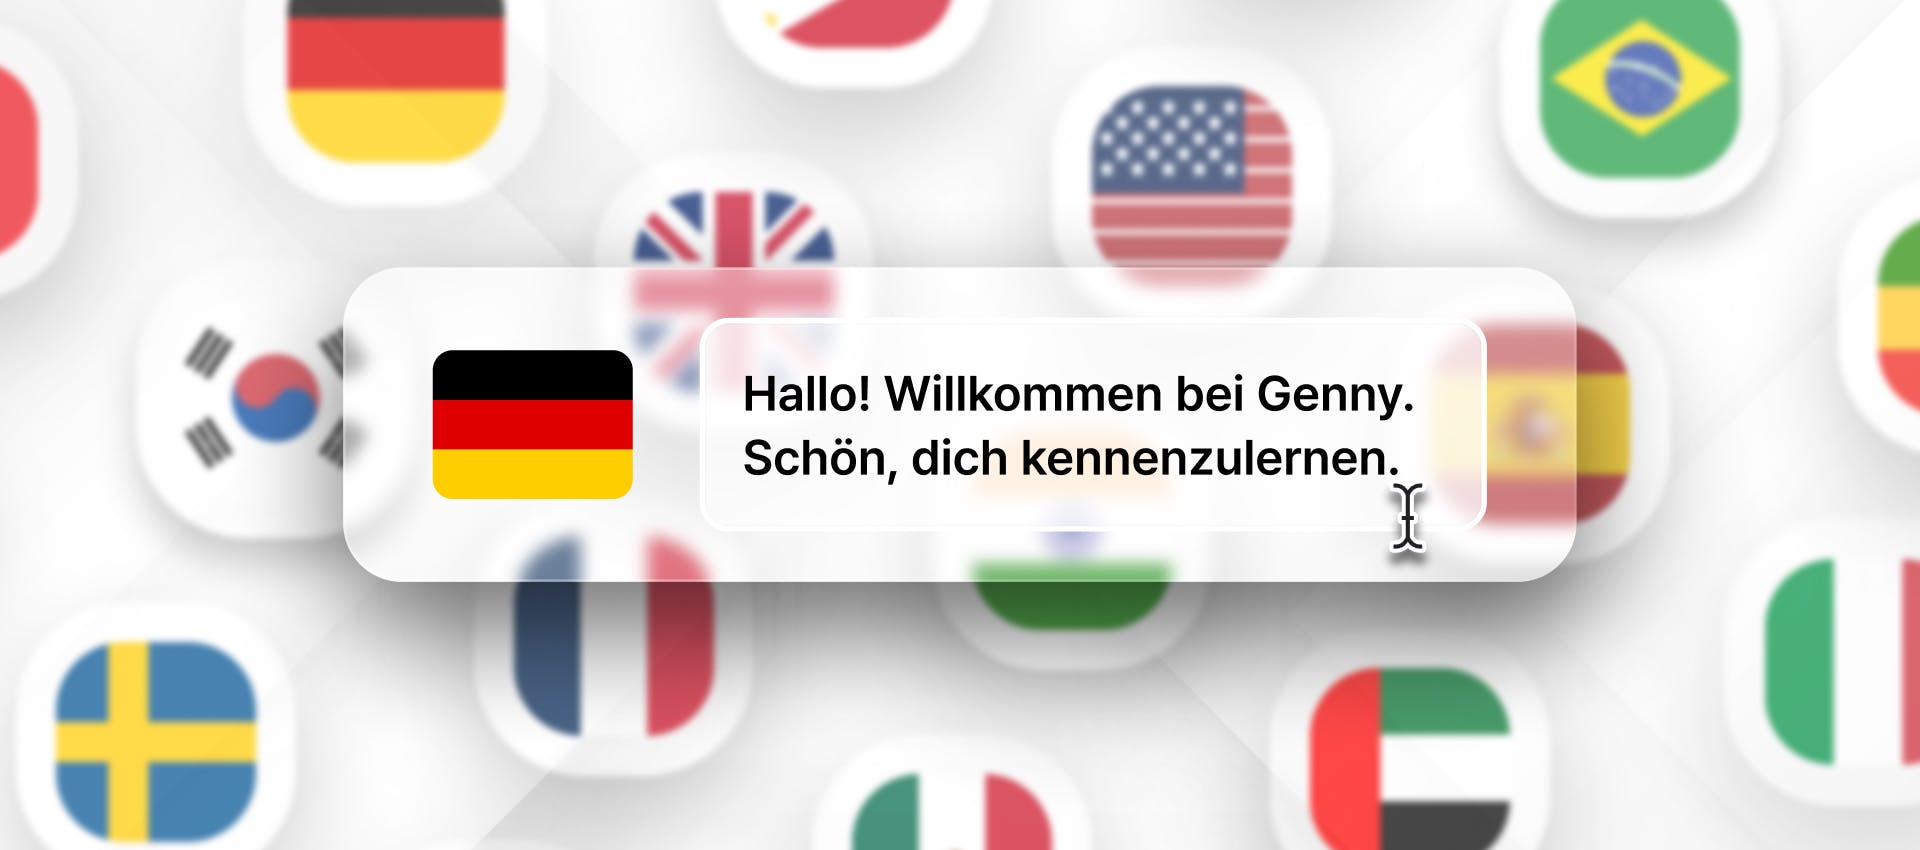 German phrase for TTS generation with different flags in the background